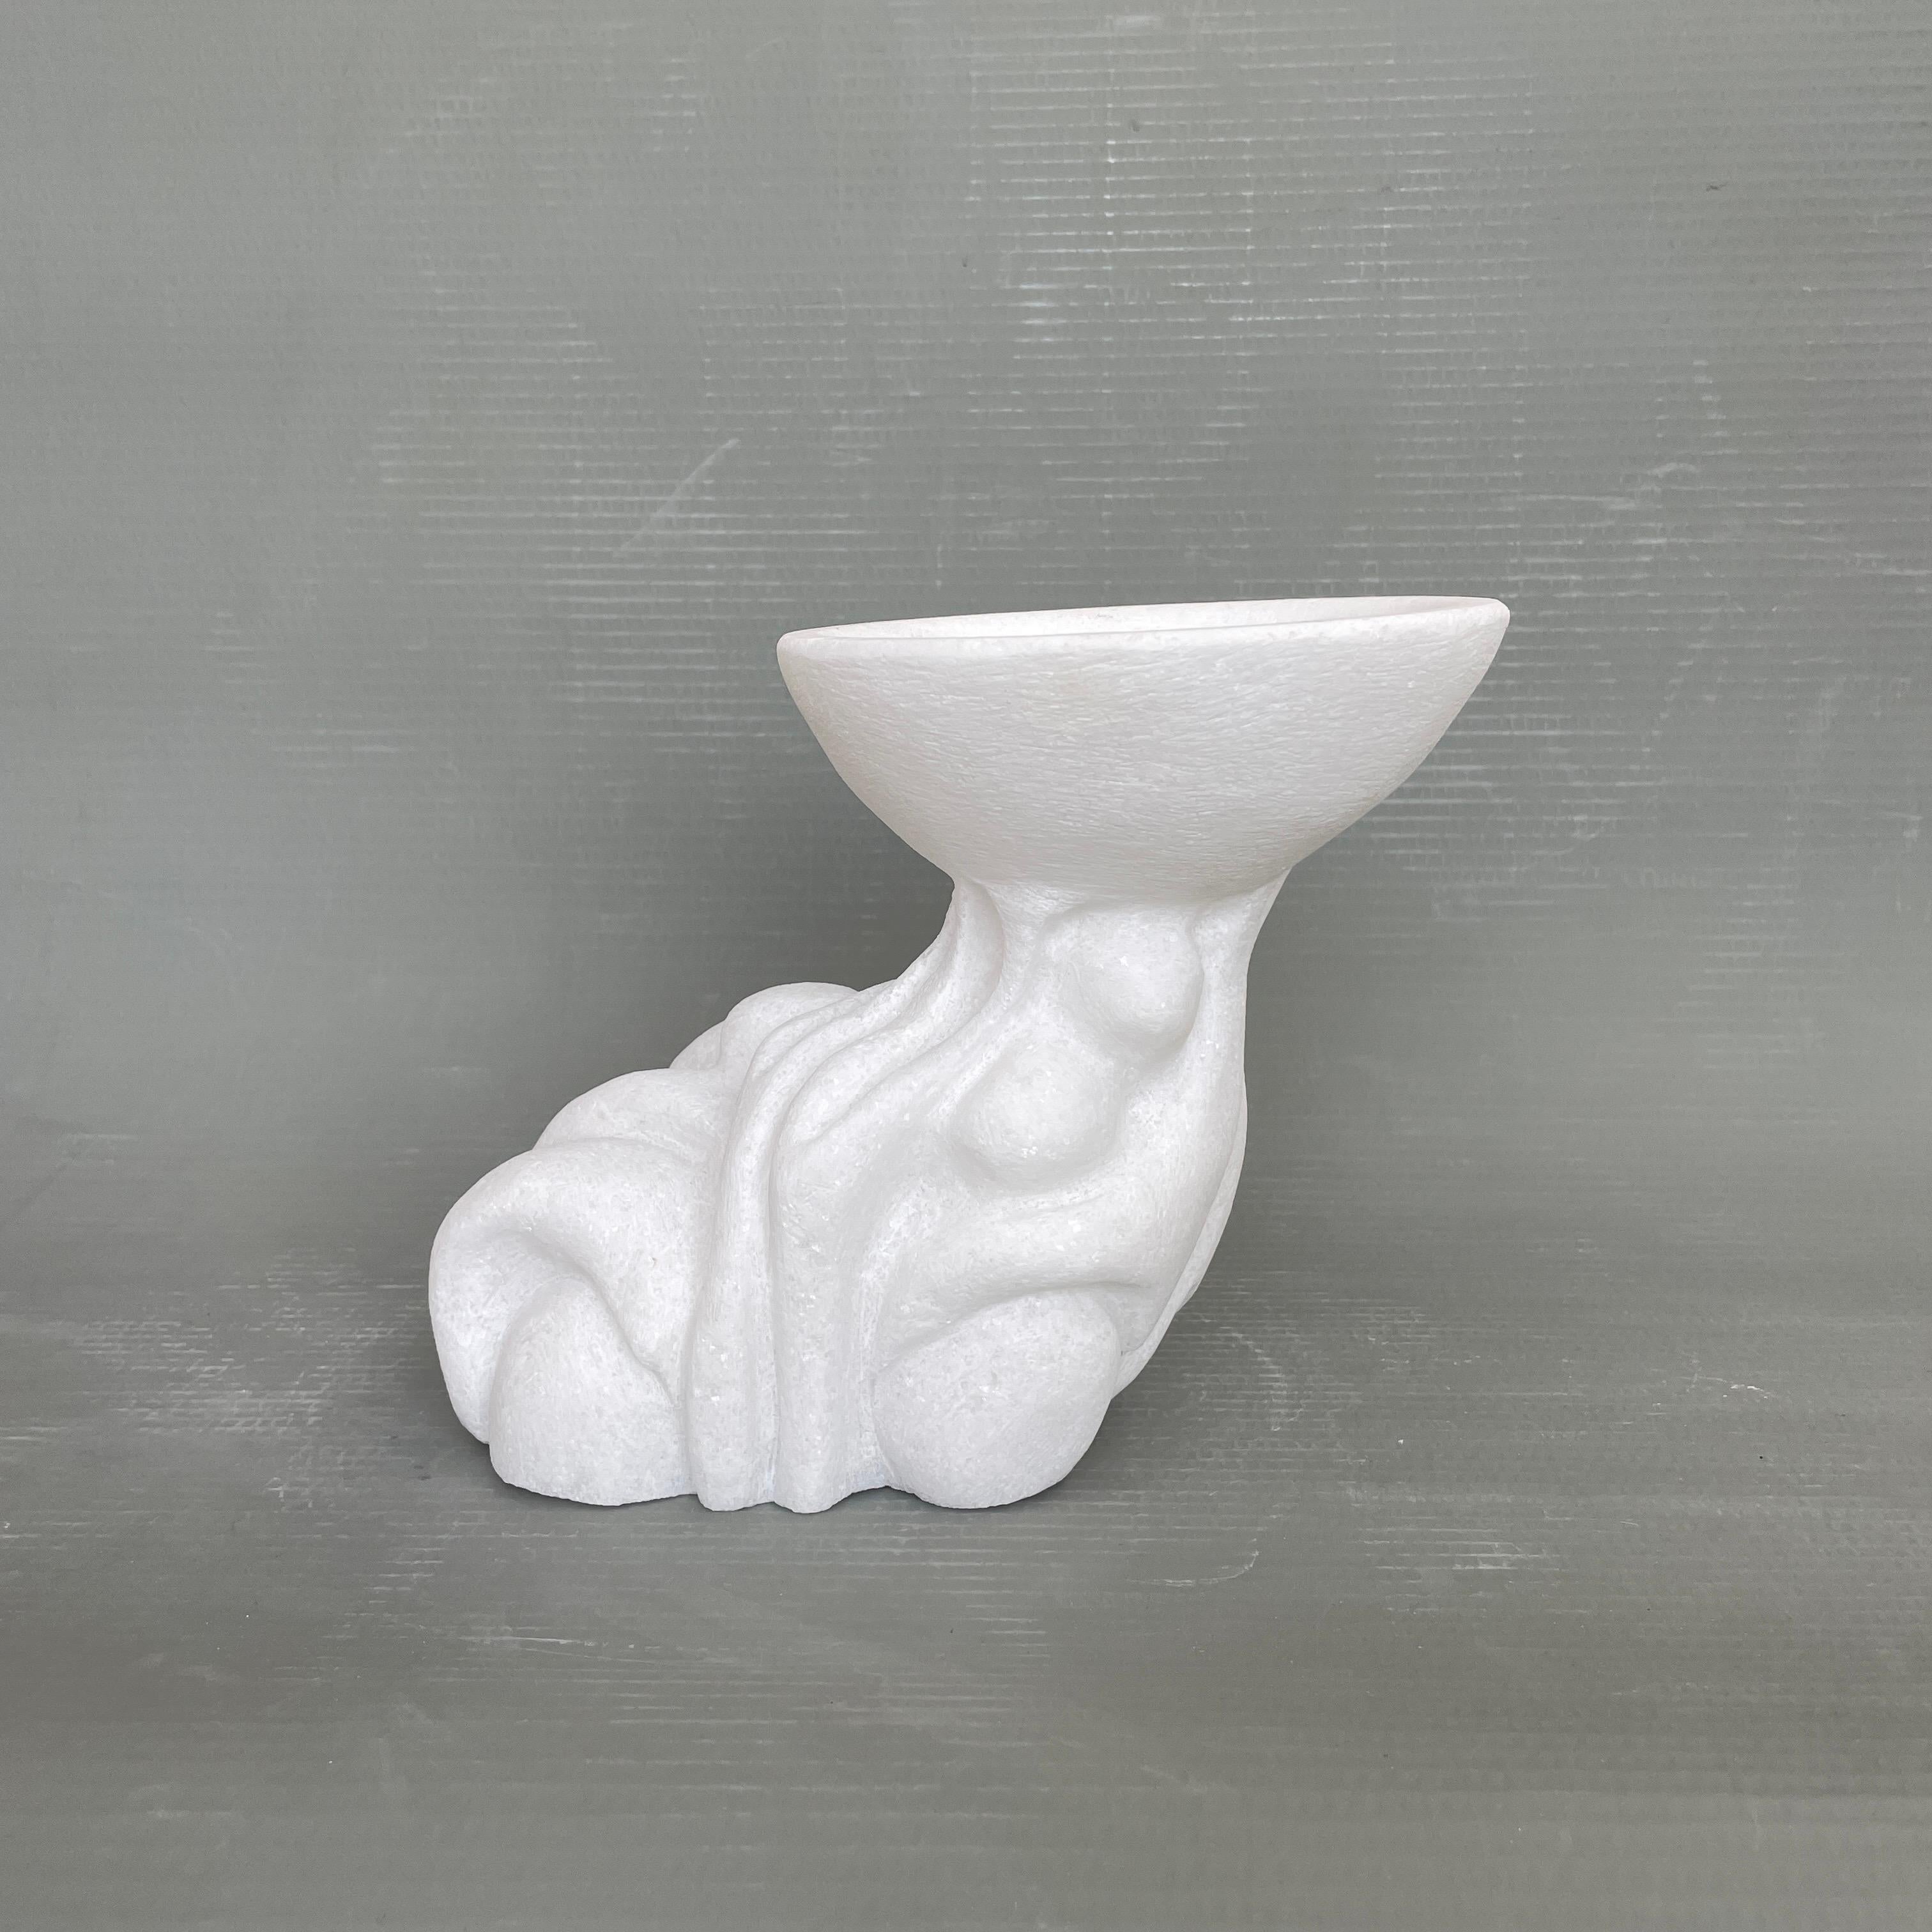 Round hand carved marble vessel by Tom Von Kaenel
Dimensions: D 16 x W 25 x H 21 cm
Materials: Marble

Tom von Kaenel, sculptor and painter, was born in Switzerland in 1961. Already in his early childhood he was deeply devoted to art. His desire